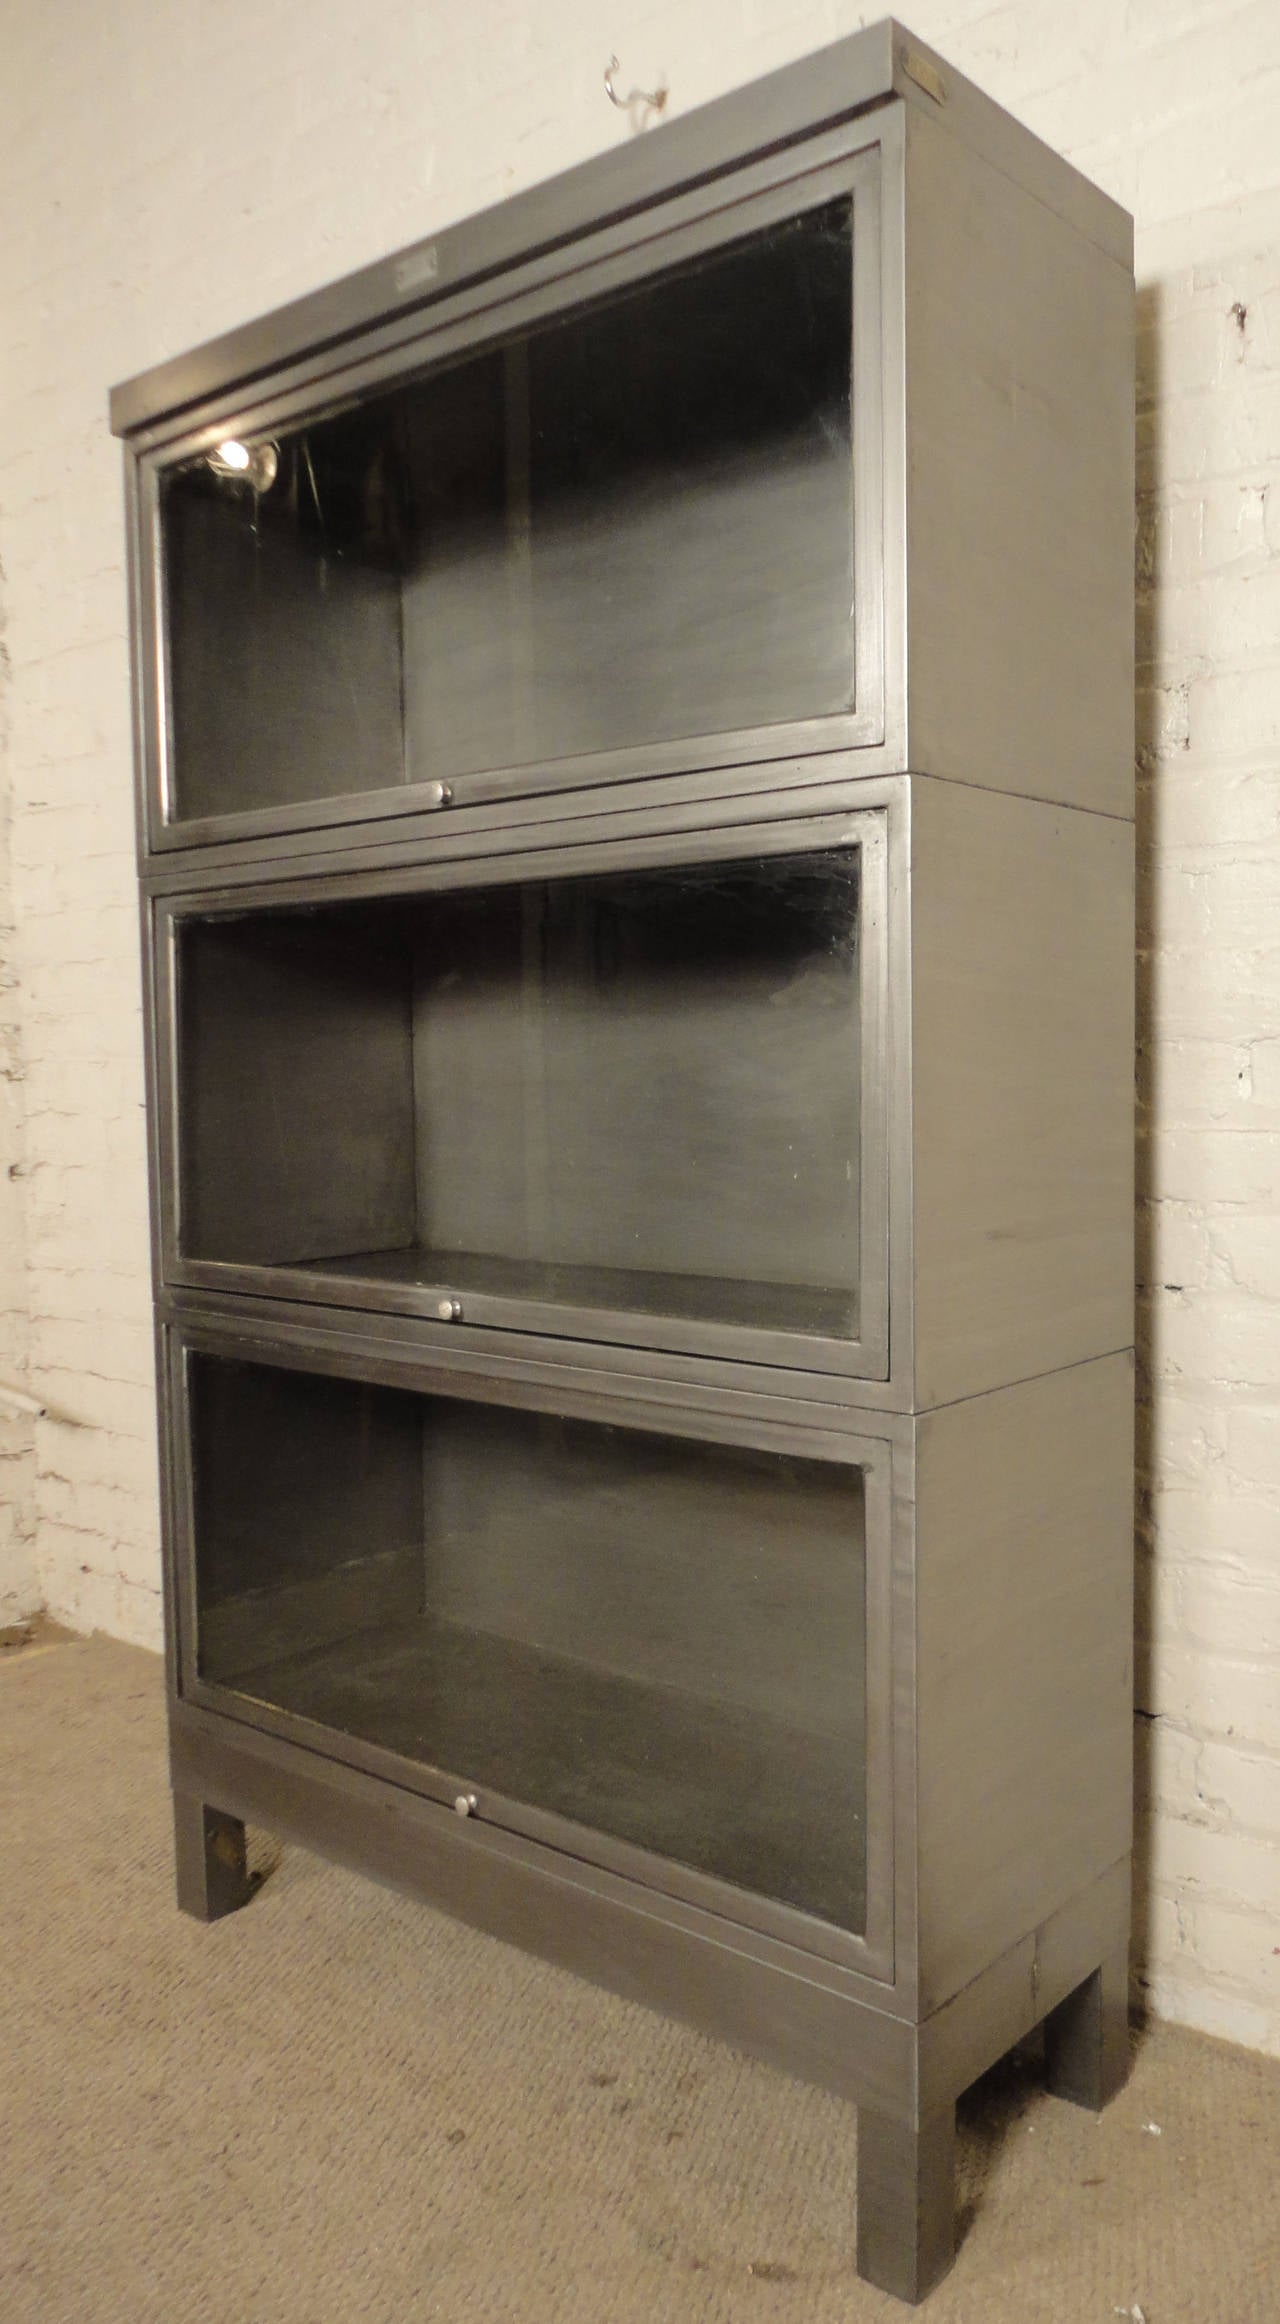 Industrial metal barrister bookcase, stacks three high. Glass window on each unit with polished brass handle. Vintage lawyer bookcase, refinished with a bare metal style for the modern home or office.
Individual Barrister Height - 18

(Please